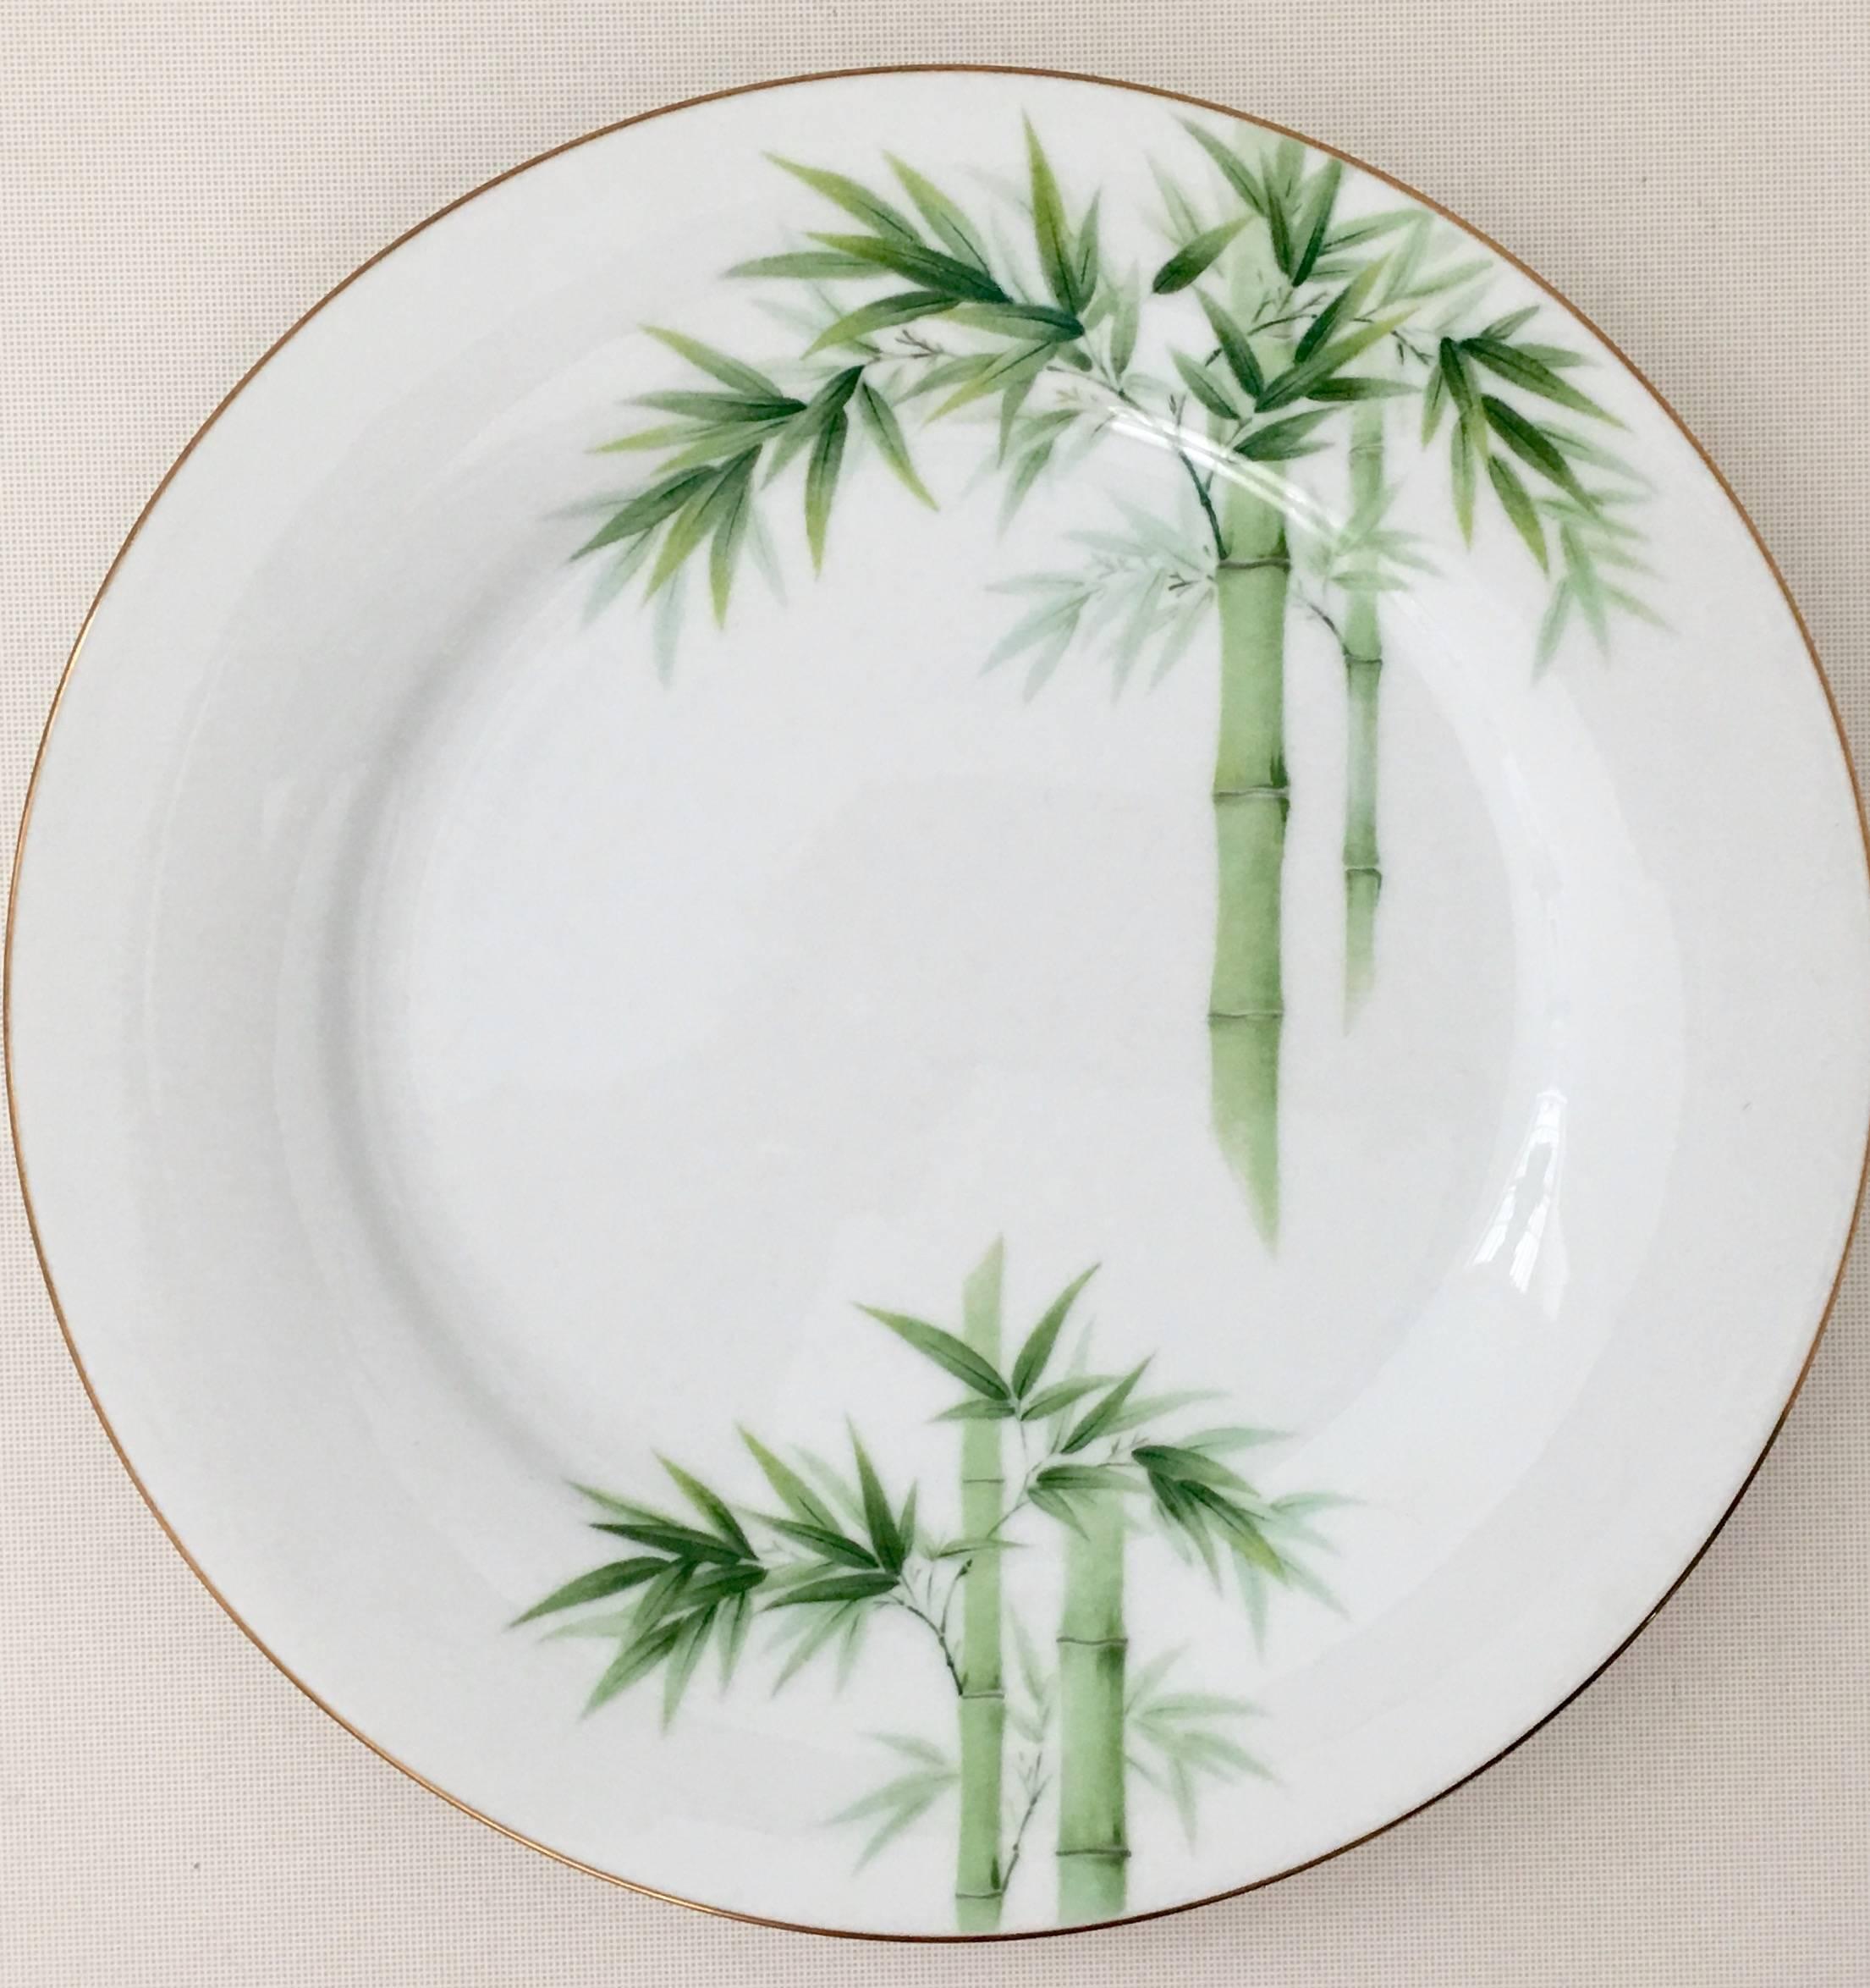 Vintage Japanese porcelain eighteen piece china set. This bright white ground pattern features a bright green bamboo pattern with a 22-karat gold rim detail. Set includes two dinner plates, eight bread/butter plates and eight fruit bowls. Each piece